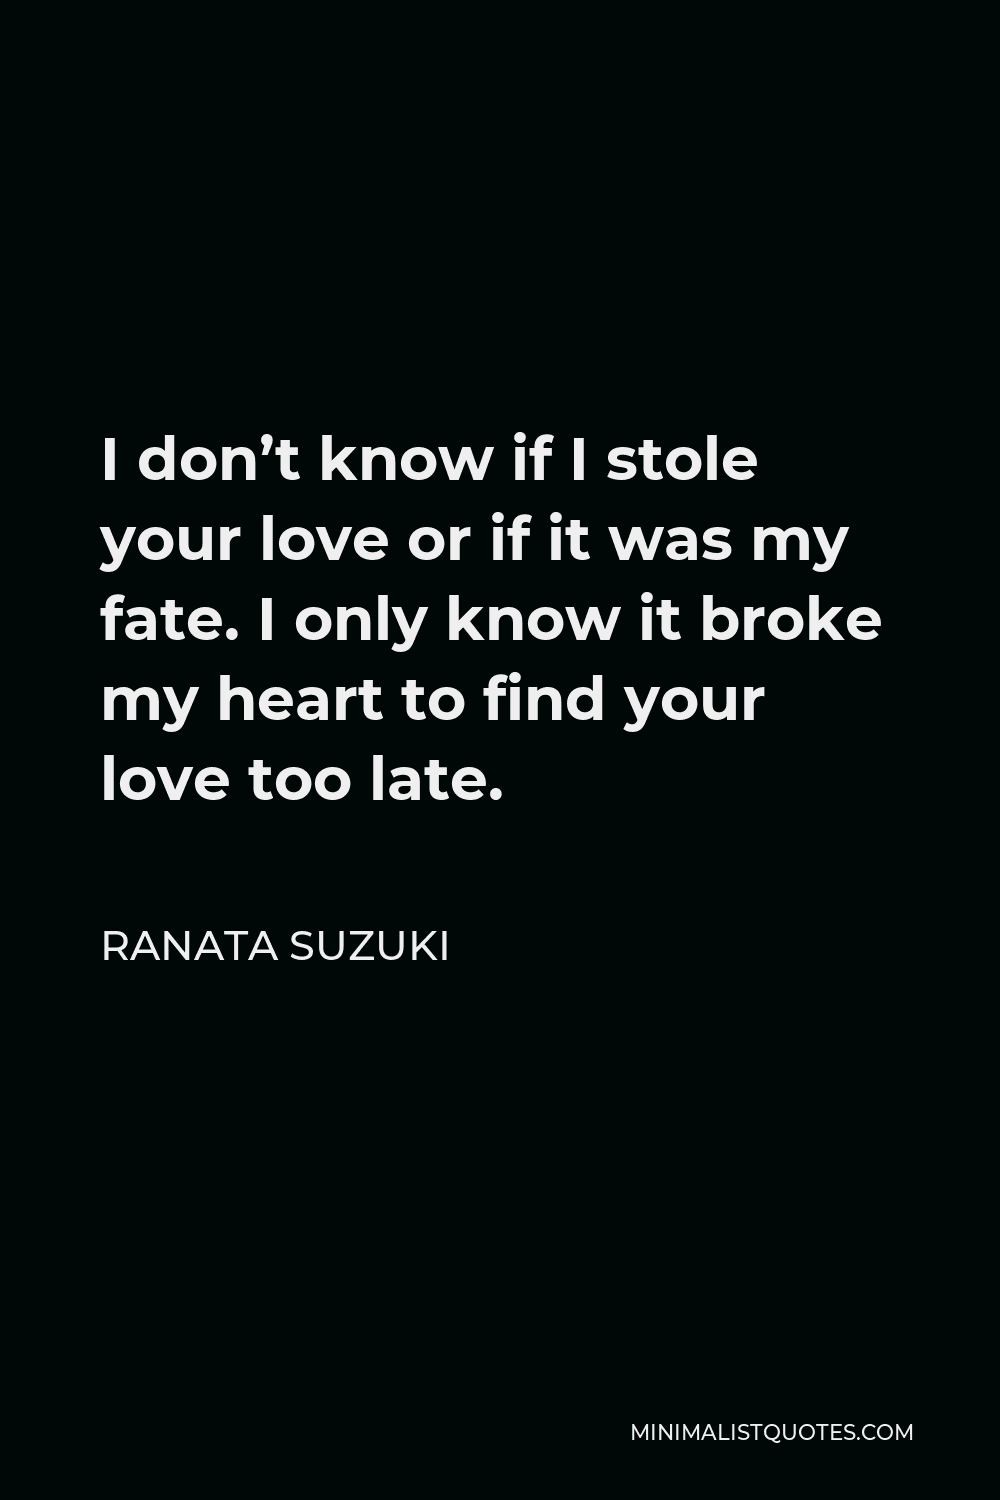 Ranata Suzuki Quote - I don’t know if I stole your love or if it was my fate. I only know it broke my heart to find your love too late.